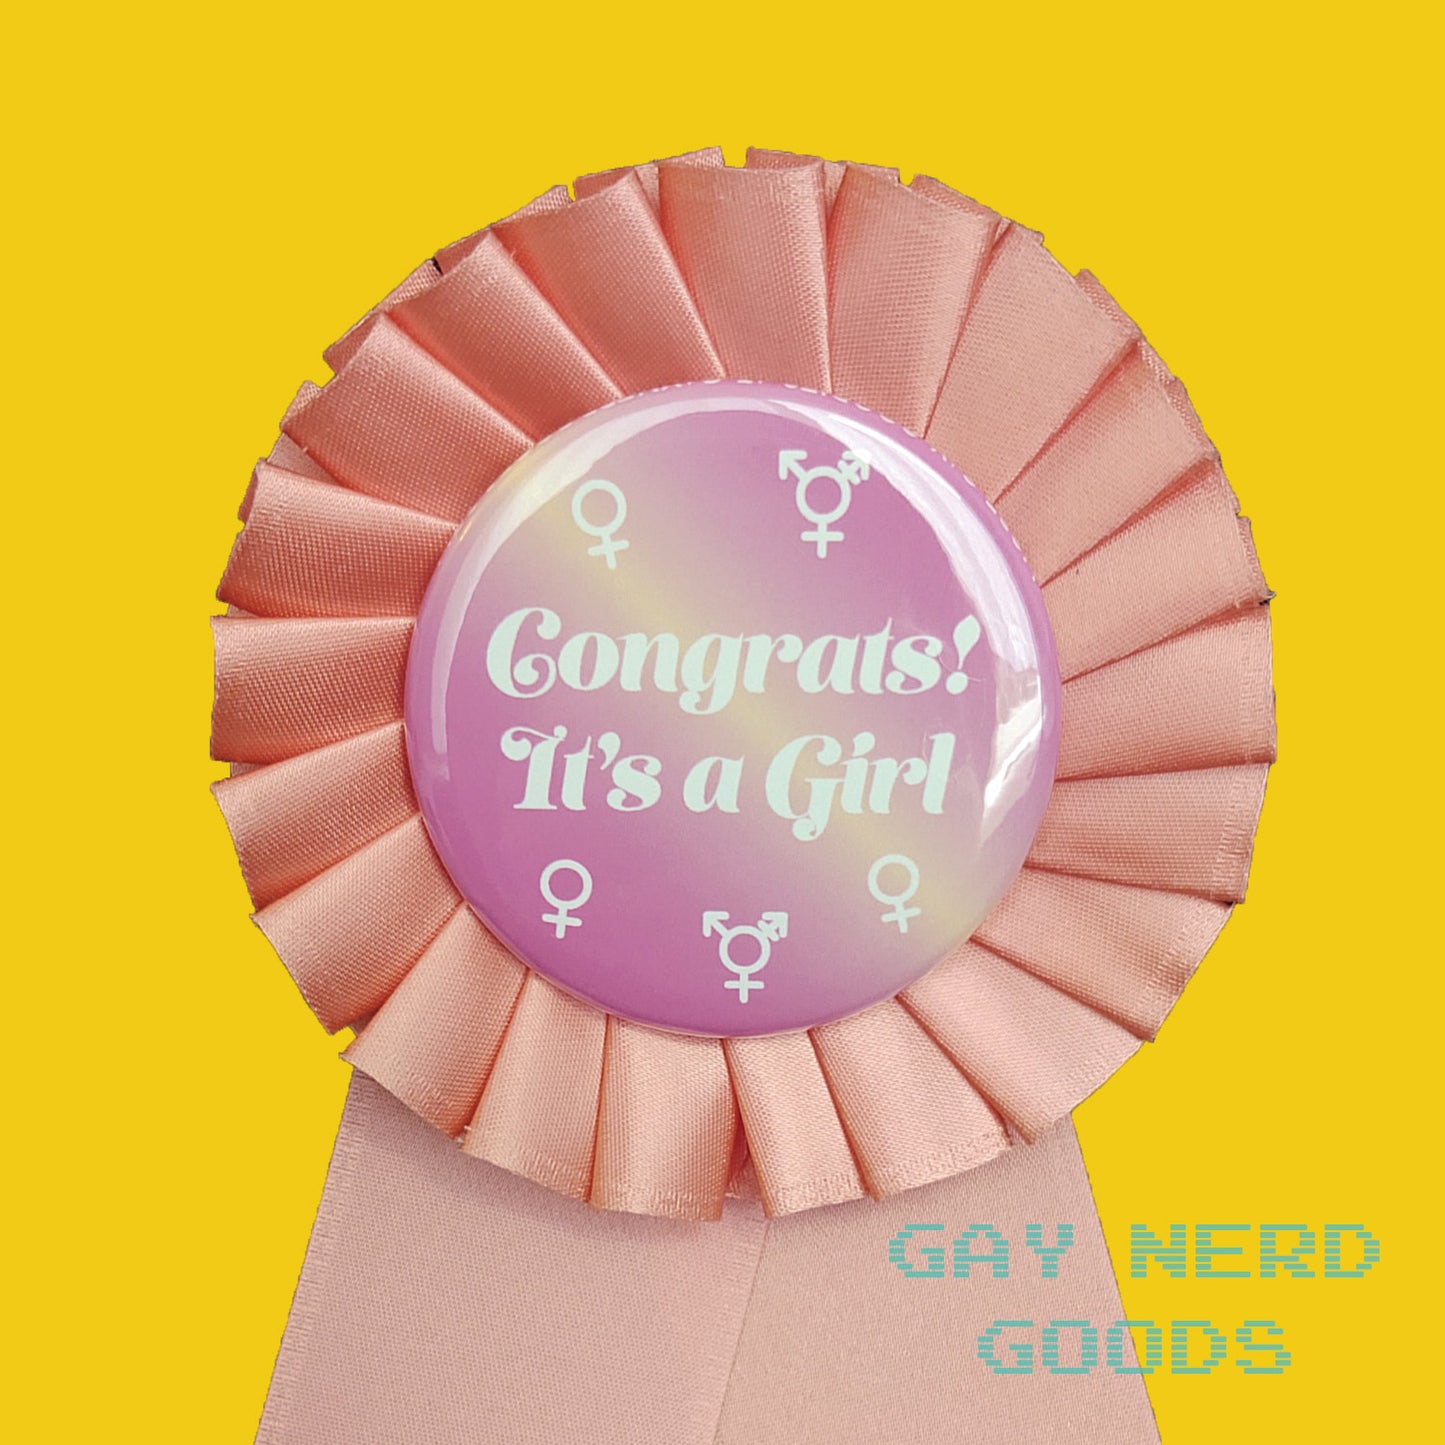 close up detail of the "congrats! it's a girl" award ribbon. The central button has white text and white female and trans symbols on a pink and yellow gradient background. The satin ribbon around it is light pink